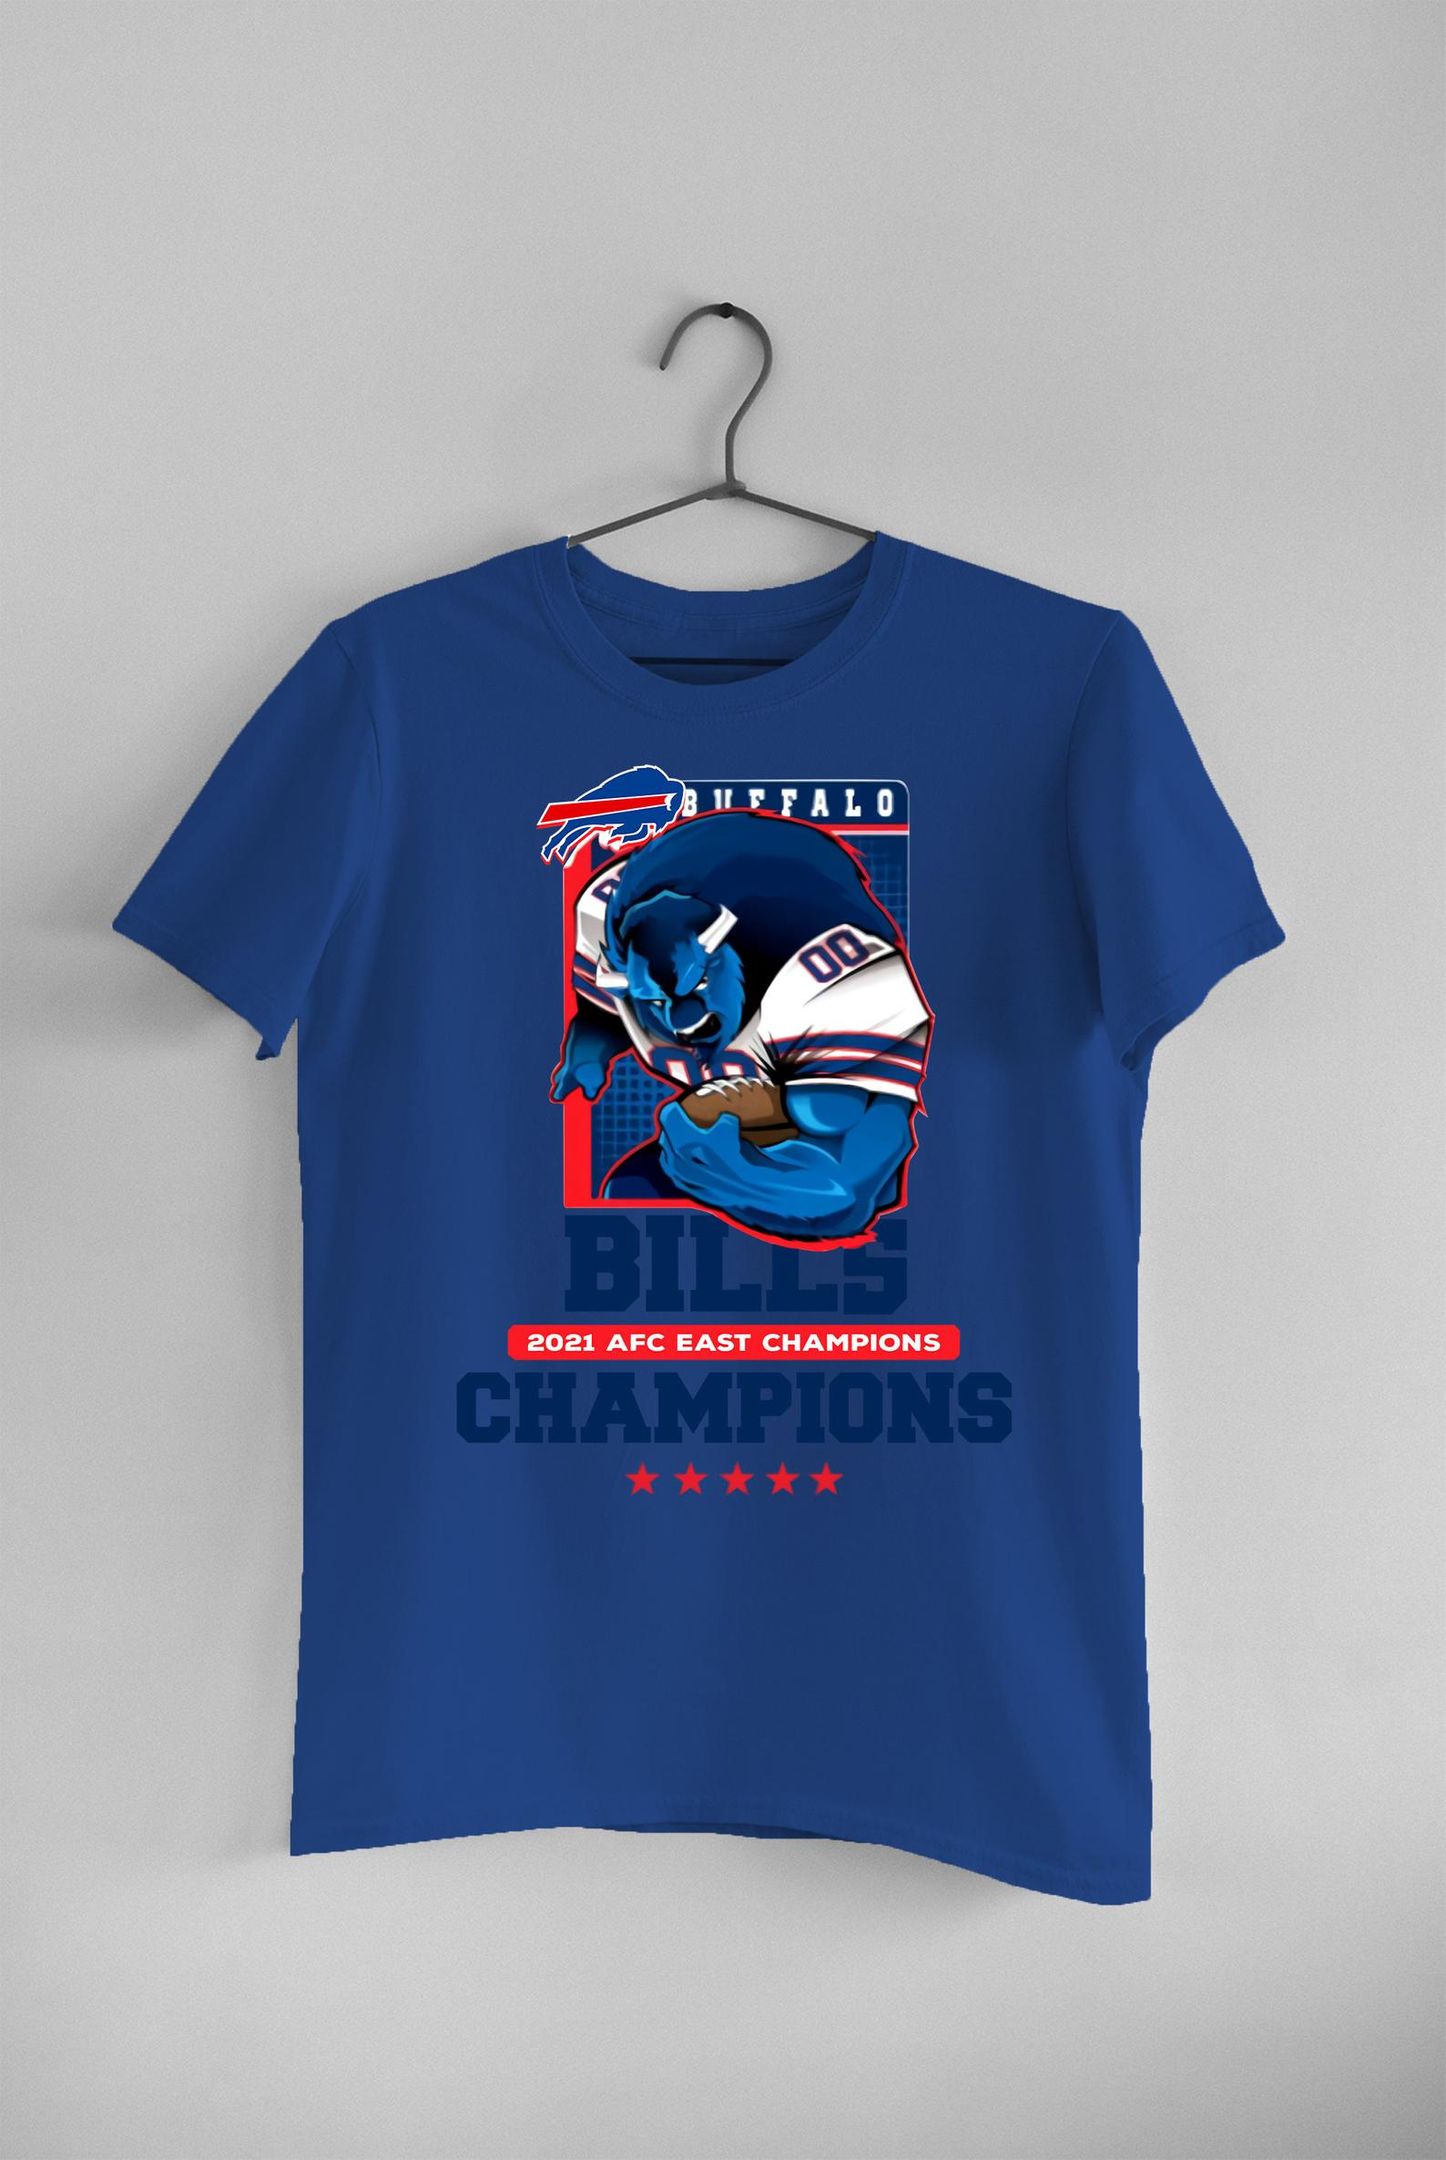 BUFFALO-BILLS-2021-Afc-East-Champions-S5-Division-Champs-Unisex-Josh-Allen-Western-New-York-Gift-For-Him-T-SHIRT-FOR-FAN-2023